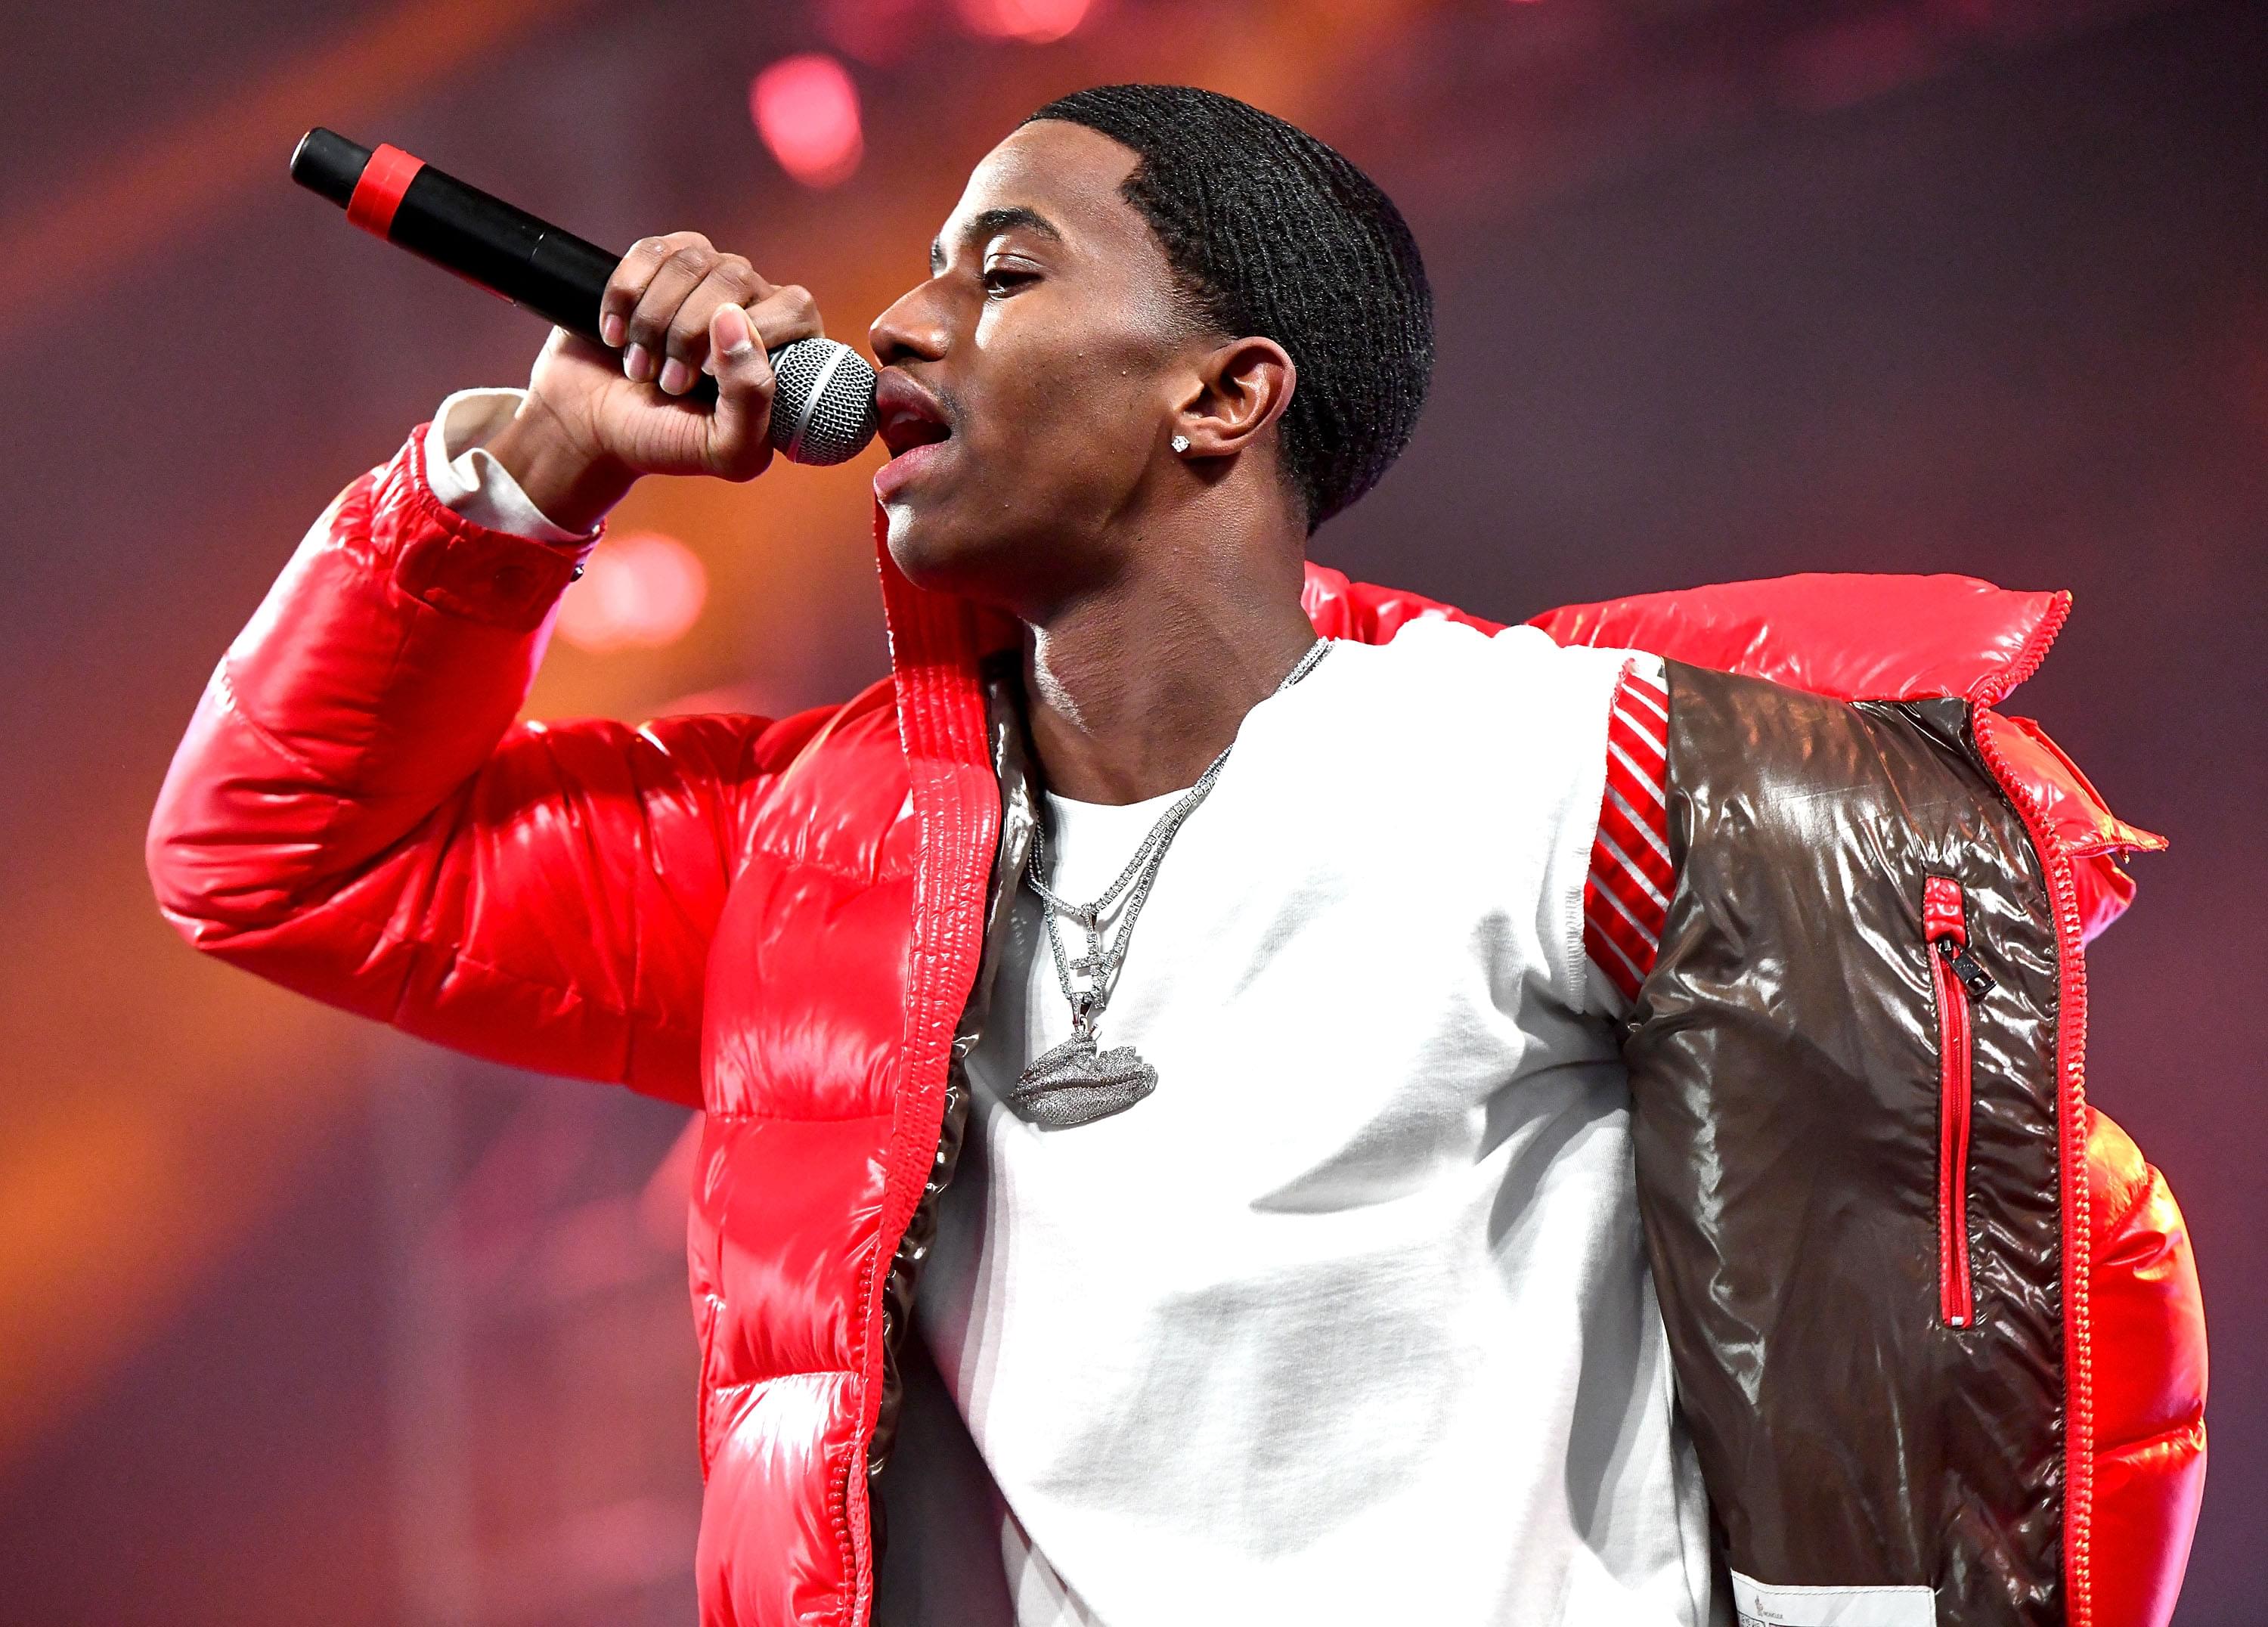 King Combs Recruits Chris Brown For “Love You Better”